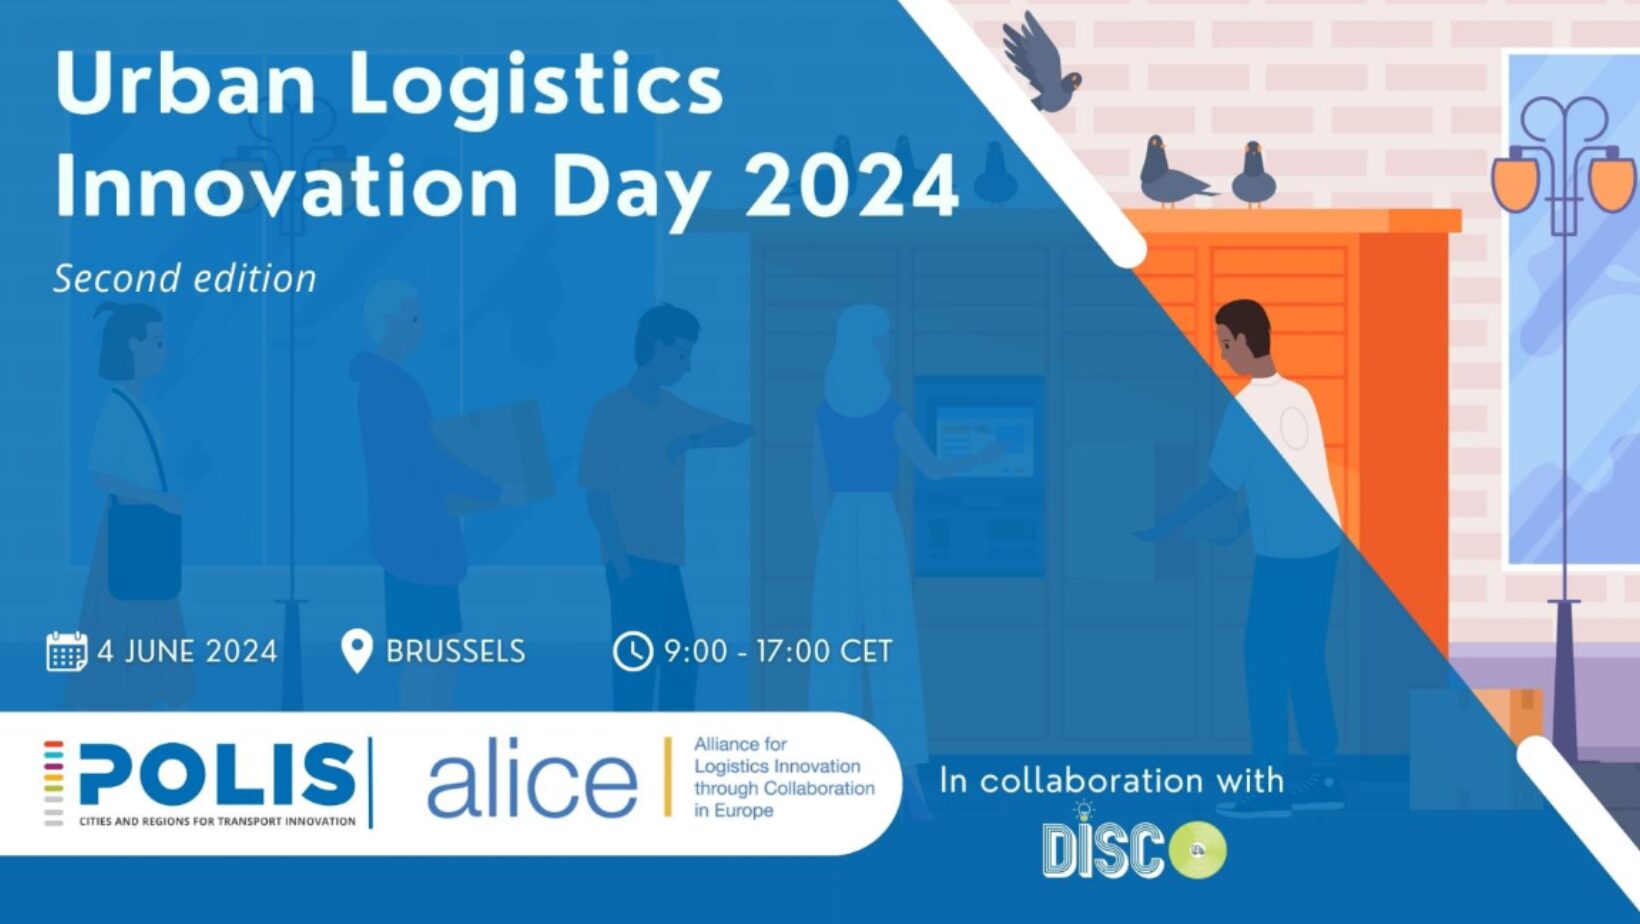 Urban Logistics Innovation Day, today in Brussels the event organised by POLIS and ALIS in cooperation with DISCO Project, coordinated by FIT